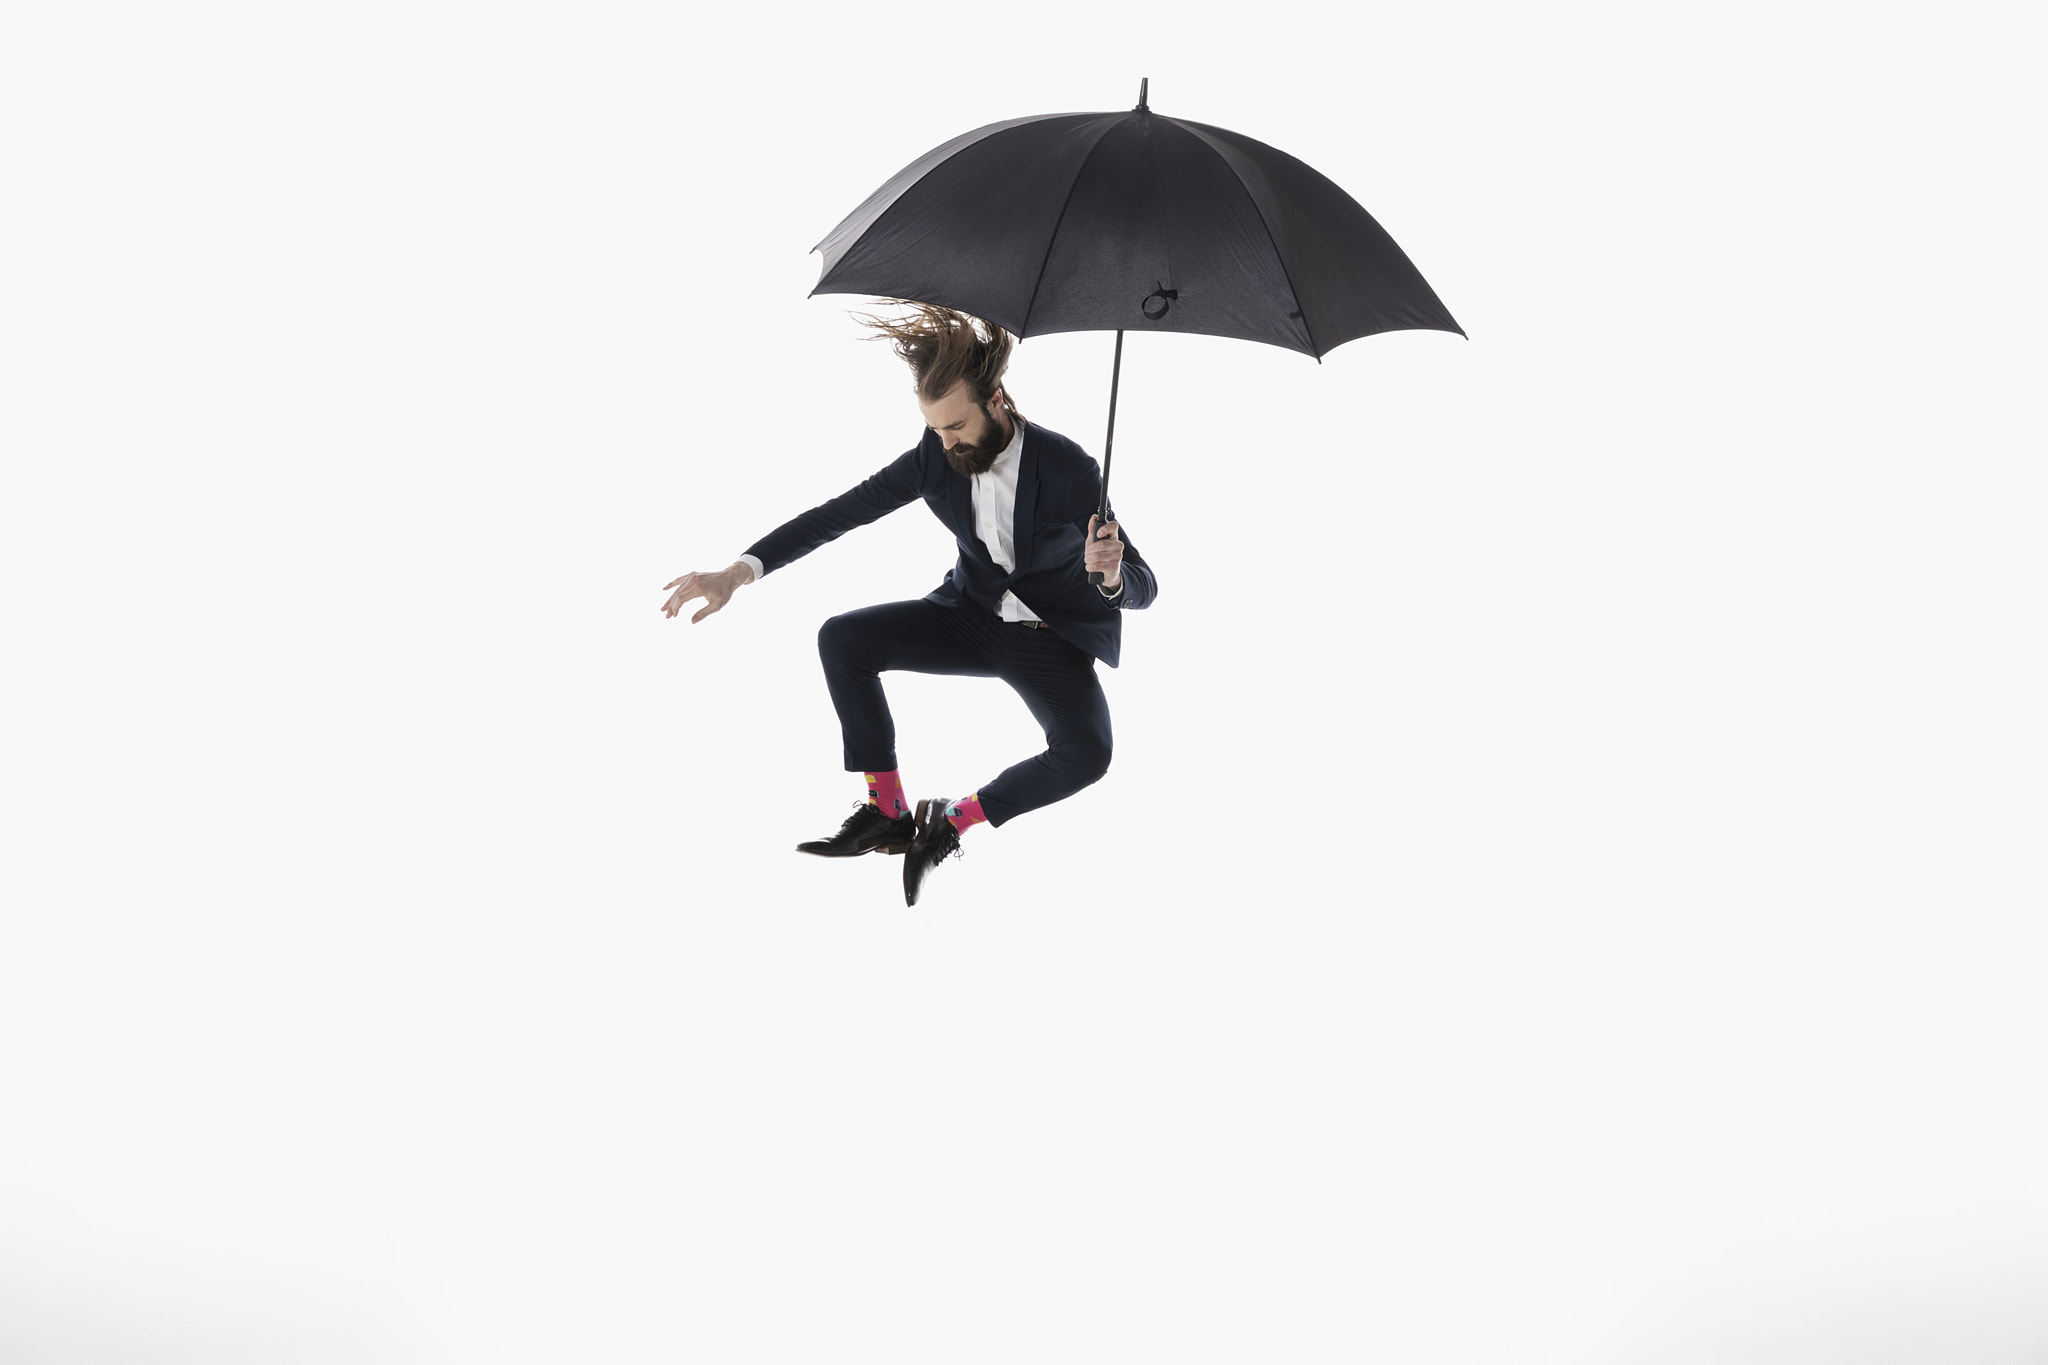 Businessman with umbrella jumping and clicking heels against white background